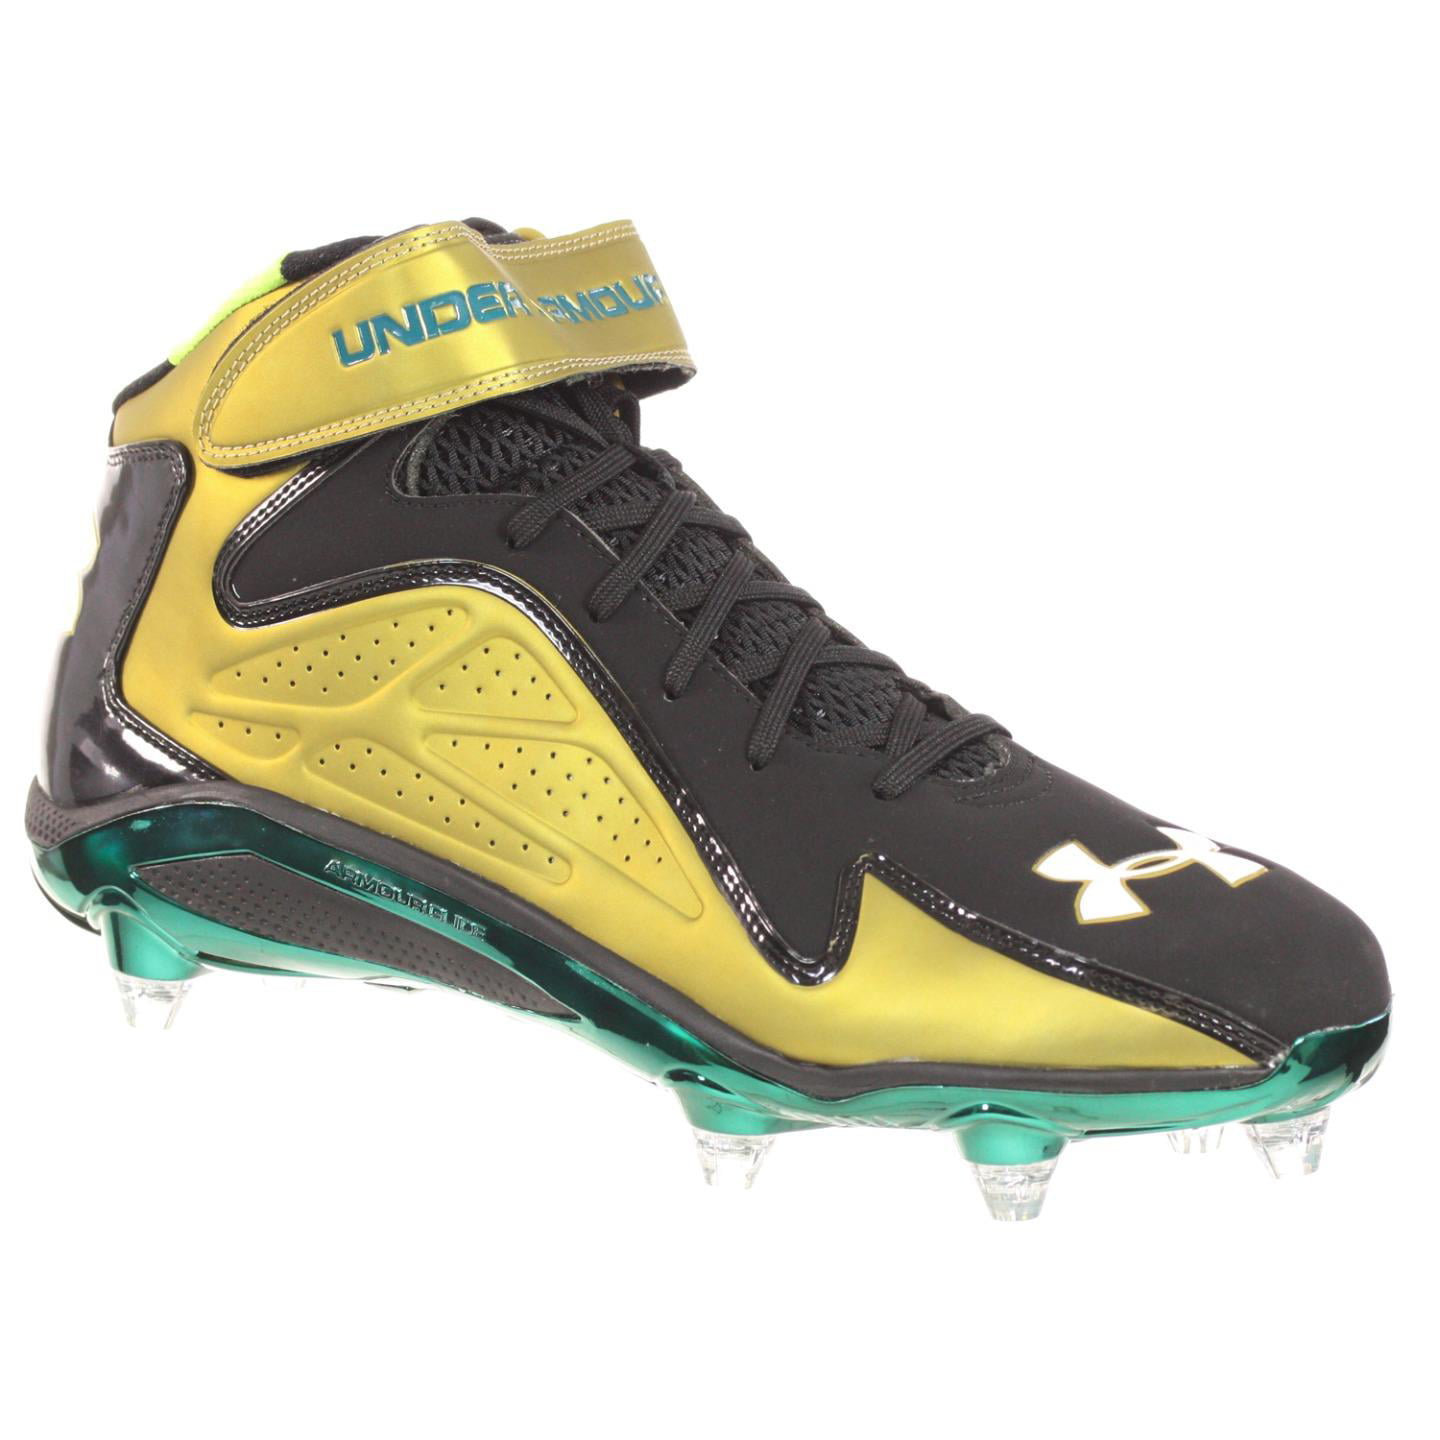 under armour renegade football cleats